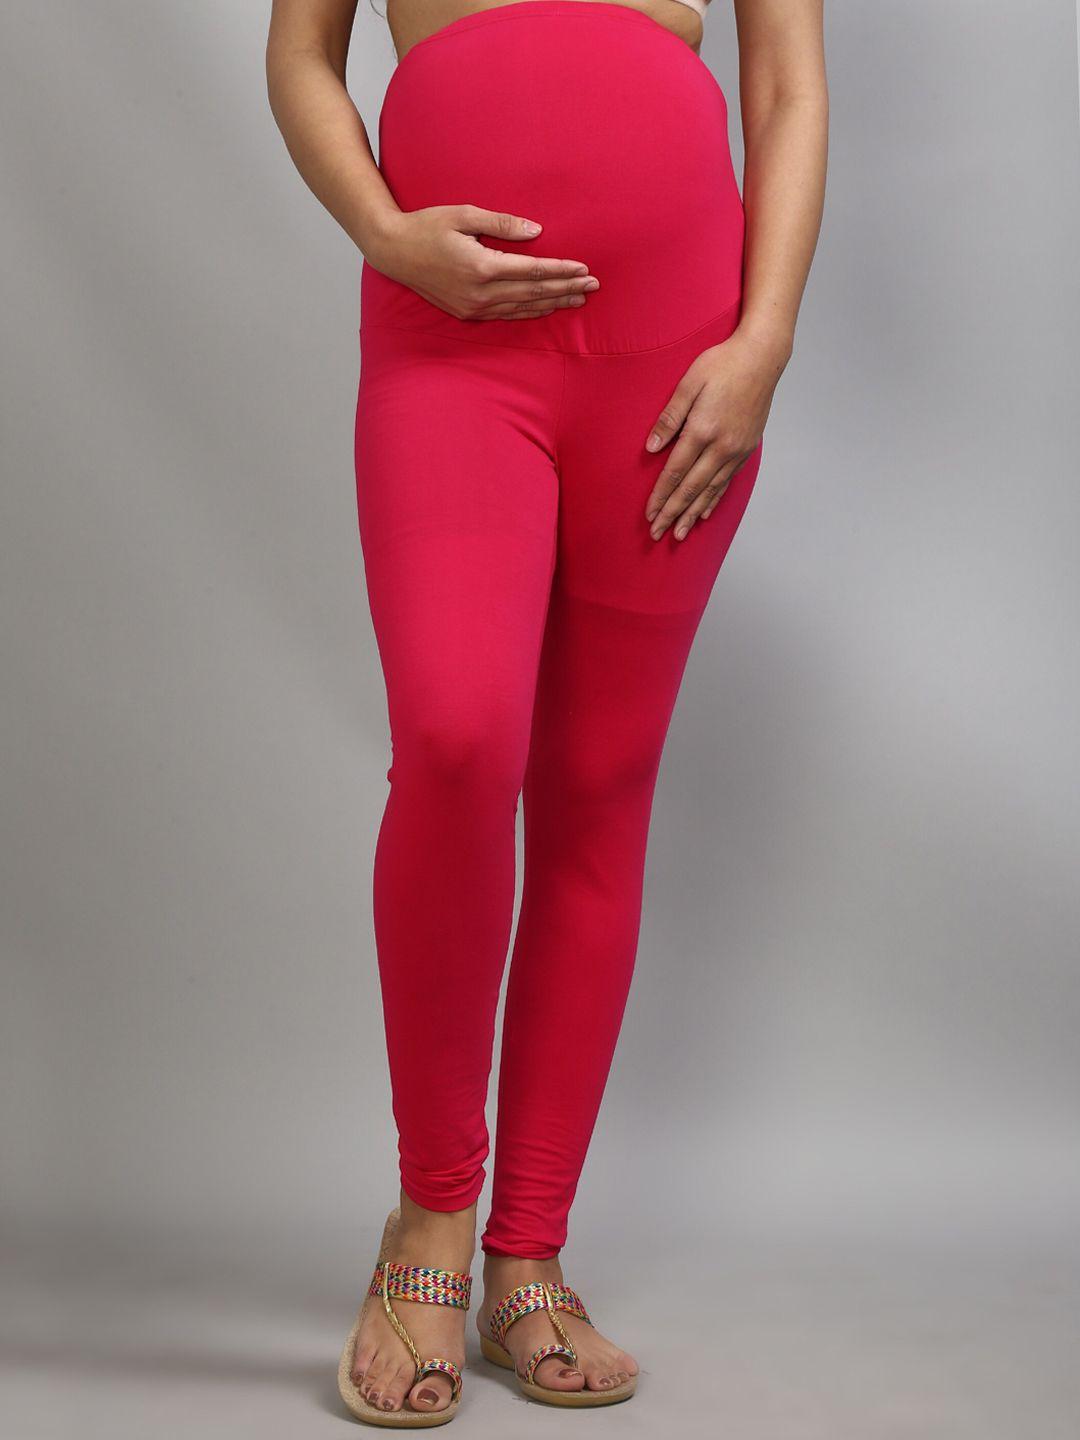 sillyboom women pink solid ankle-length maternity leggings